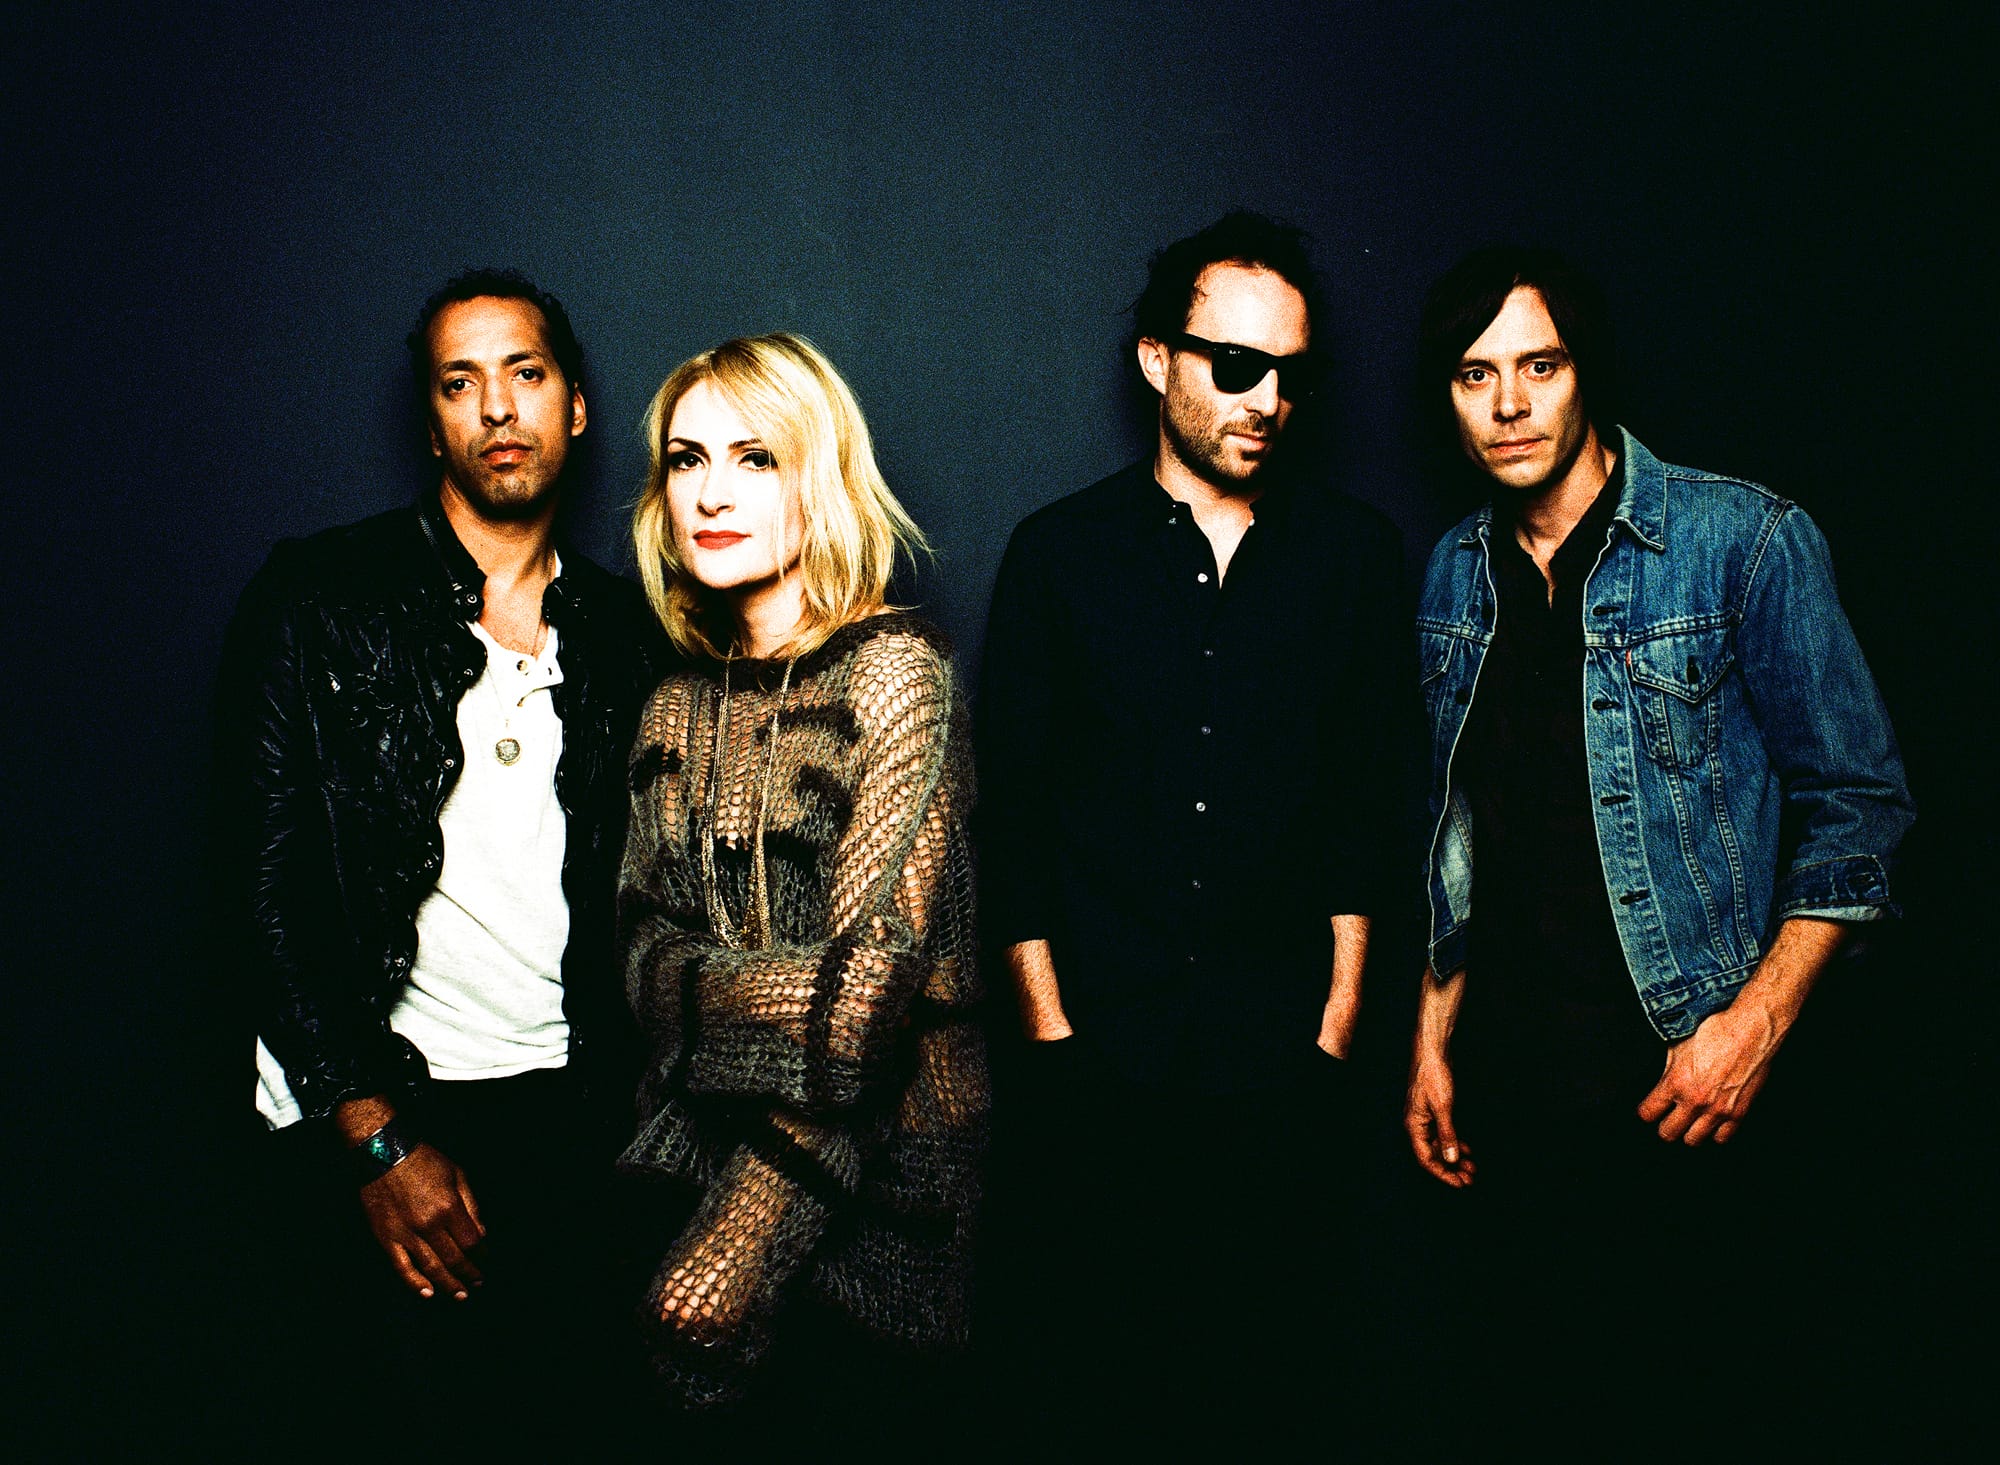 Canadian indie rock band Metric will perform on Dec. 3, 2012 at the Roseland Theater.